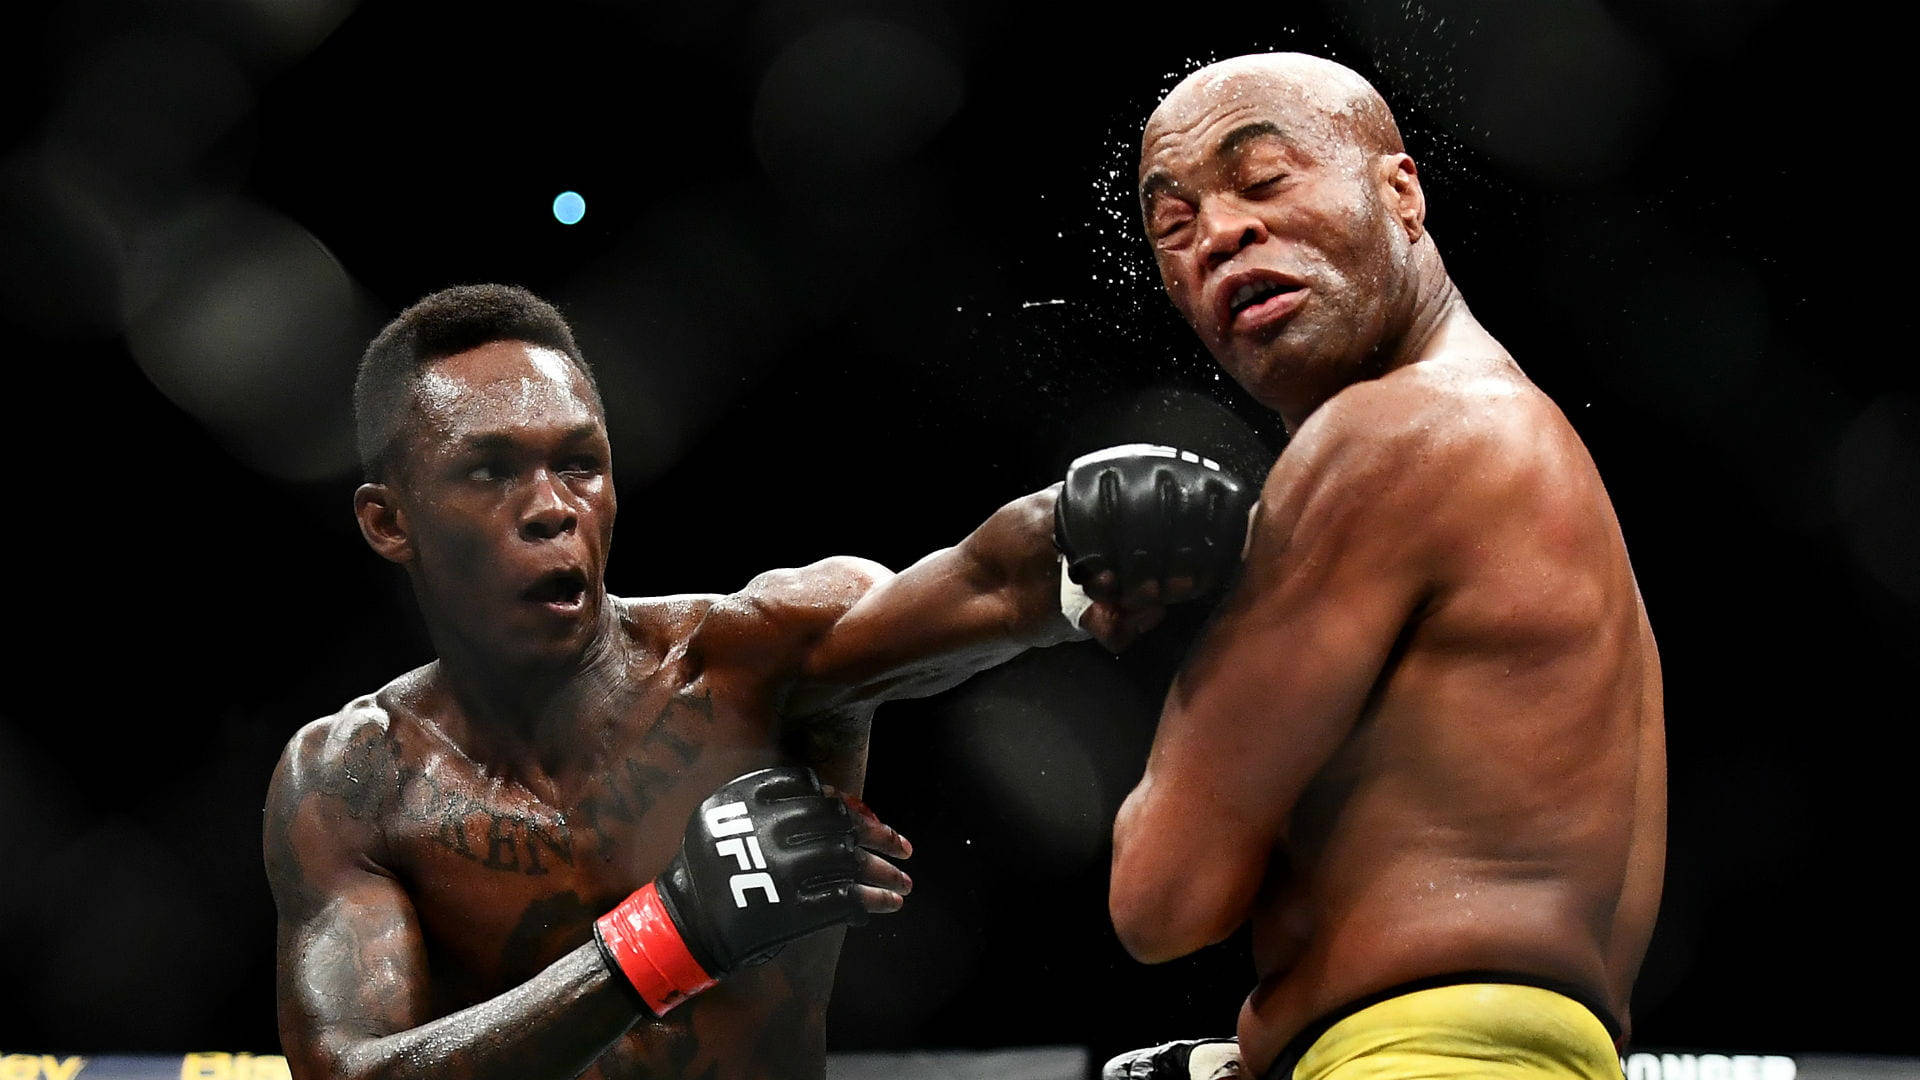 Anderson Silva Being Punched Wallpaper